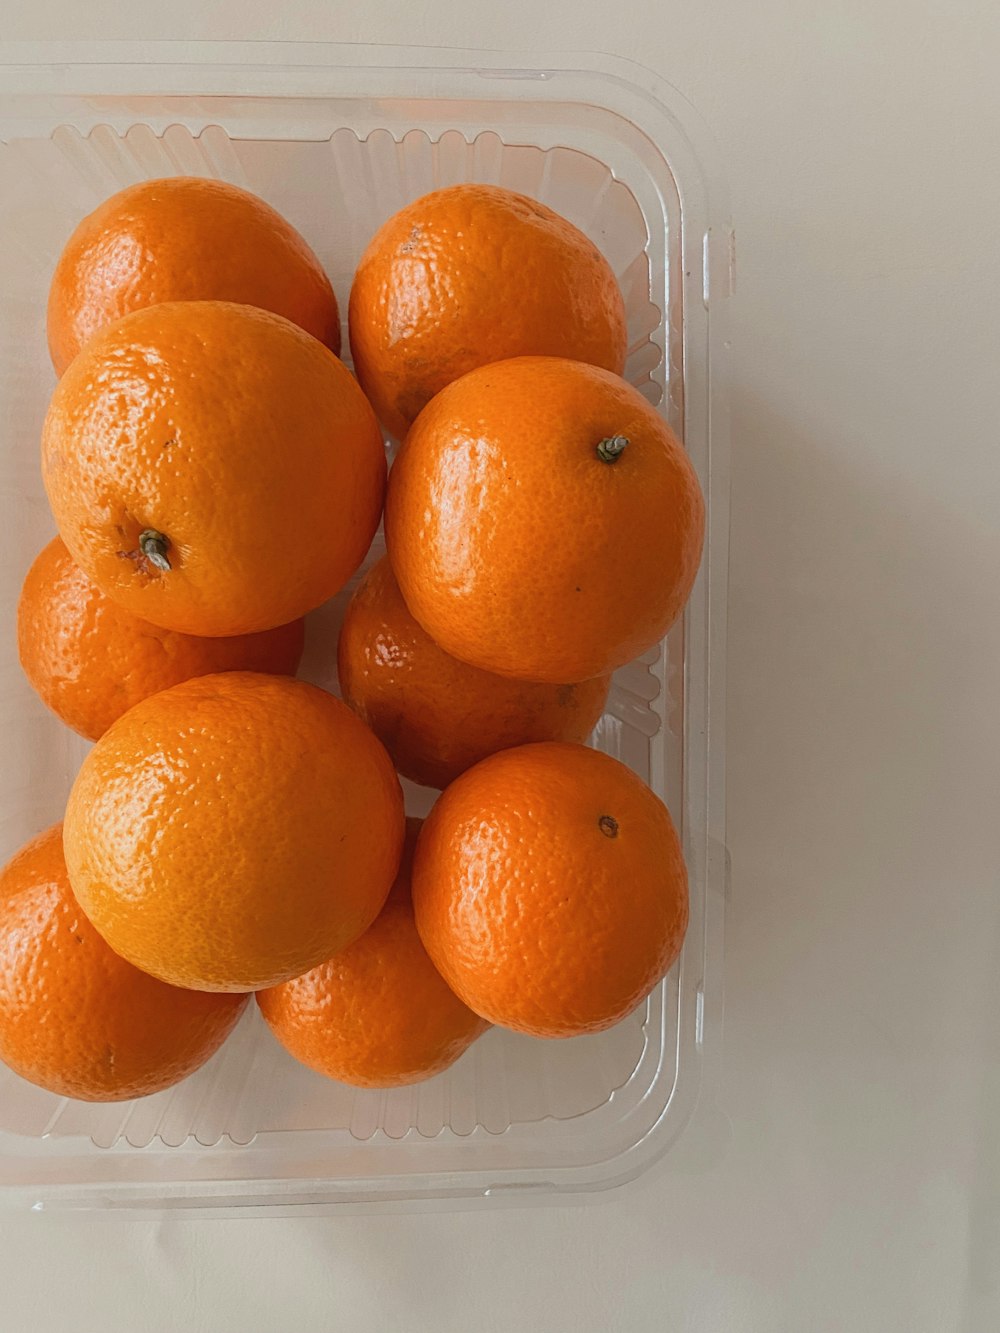 a plastic container filled with oranges on top of a table